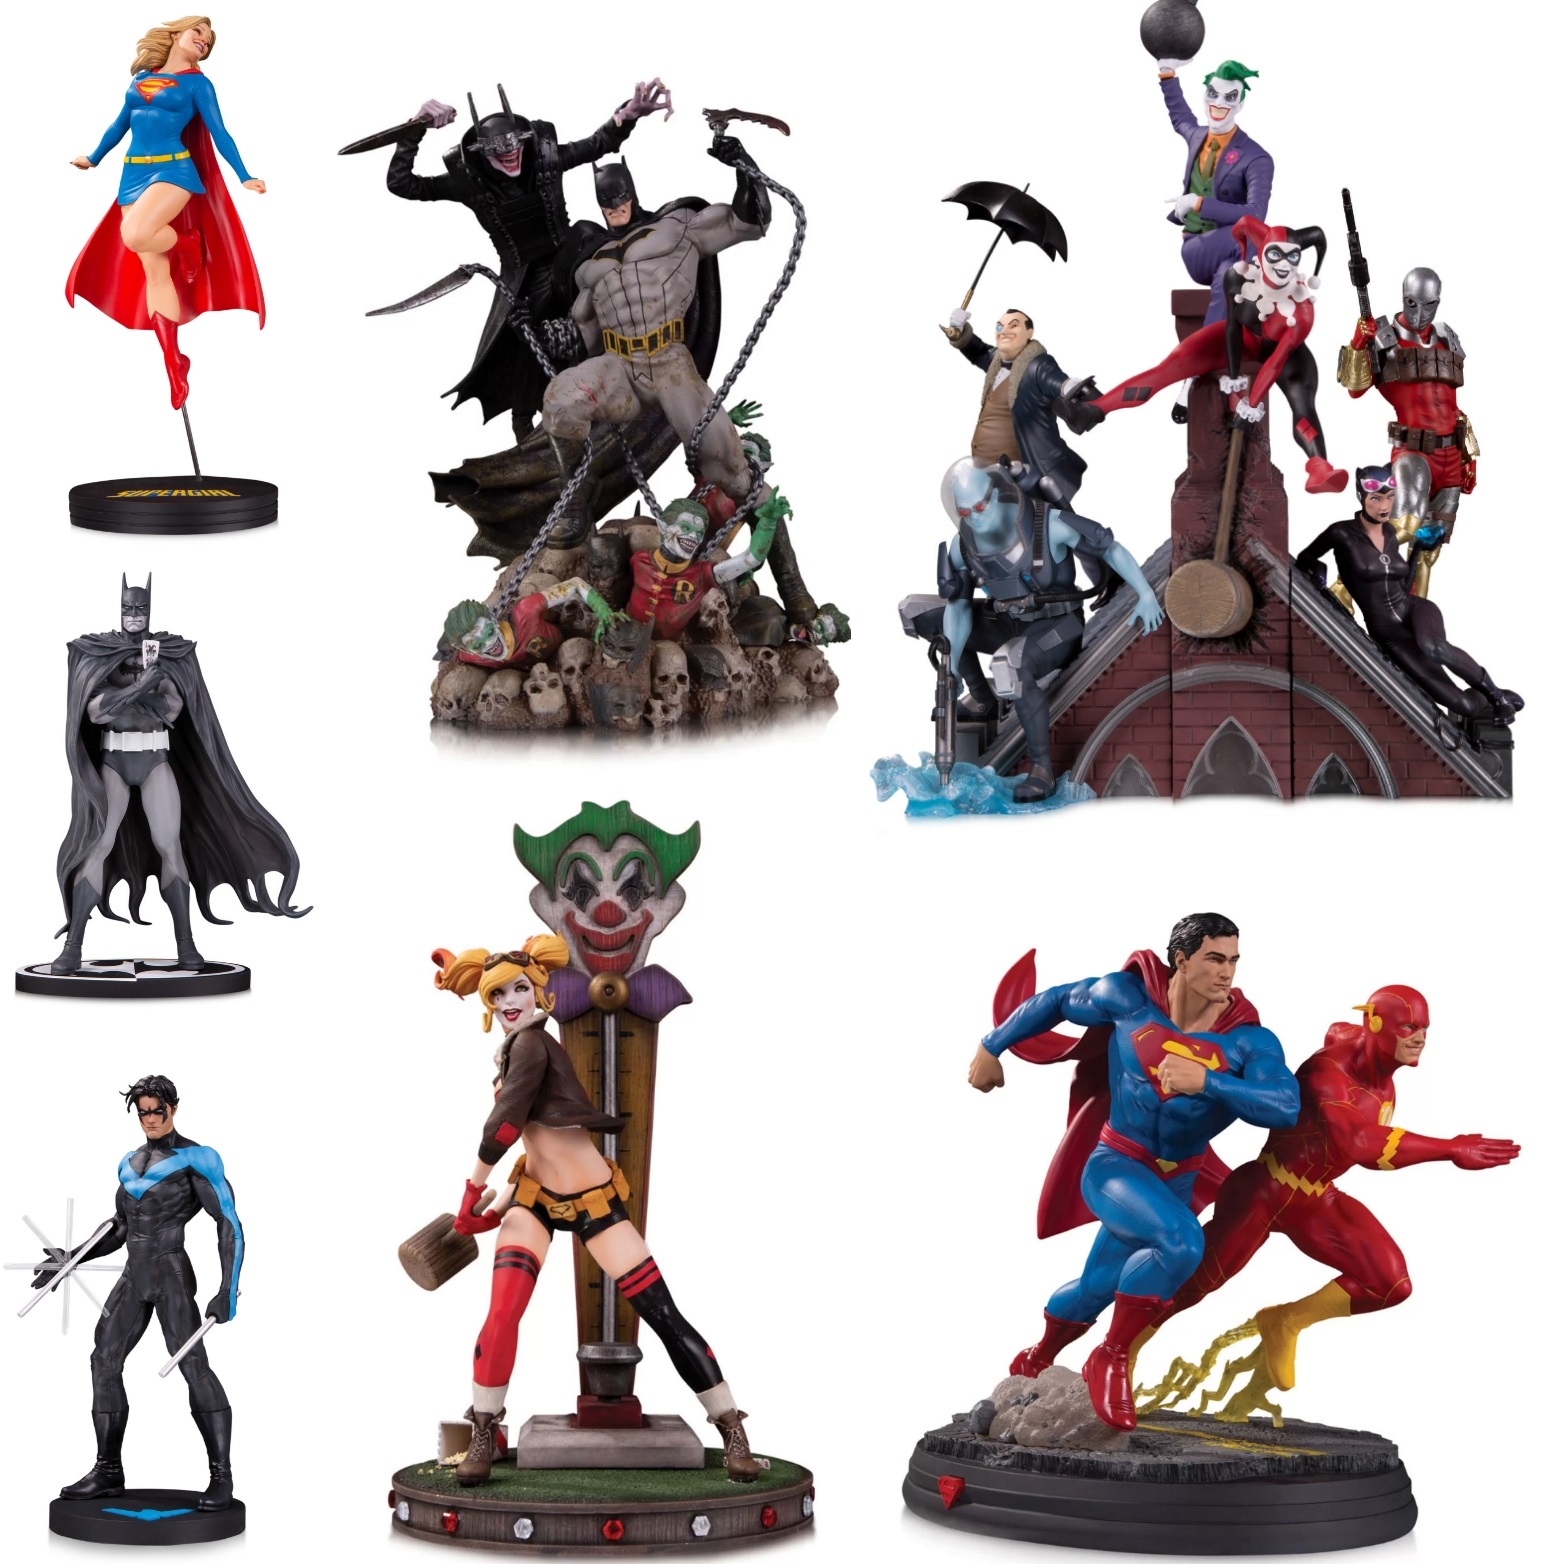 A number of previously solicited DC Direct products from some of their top lines